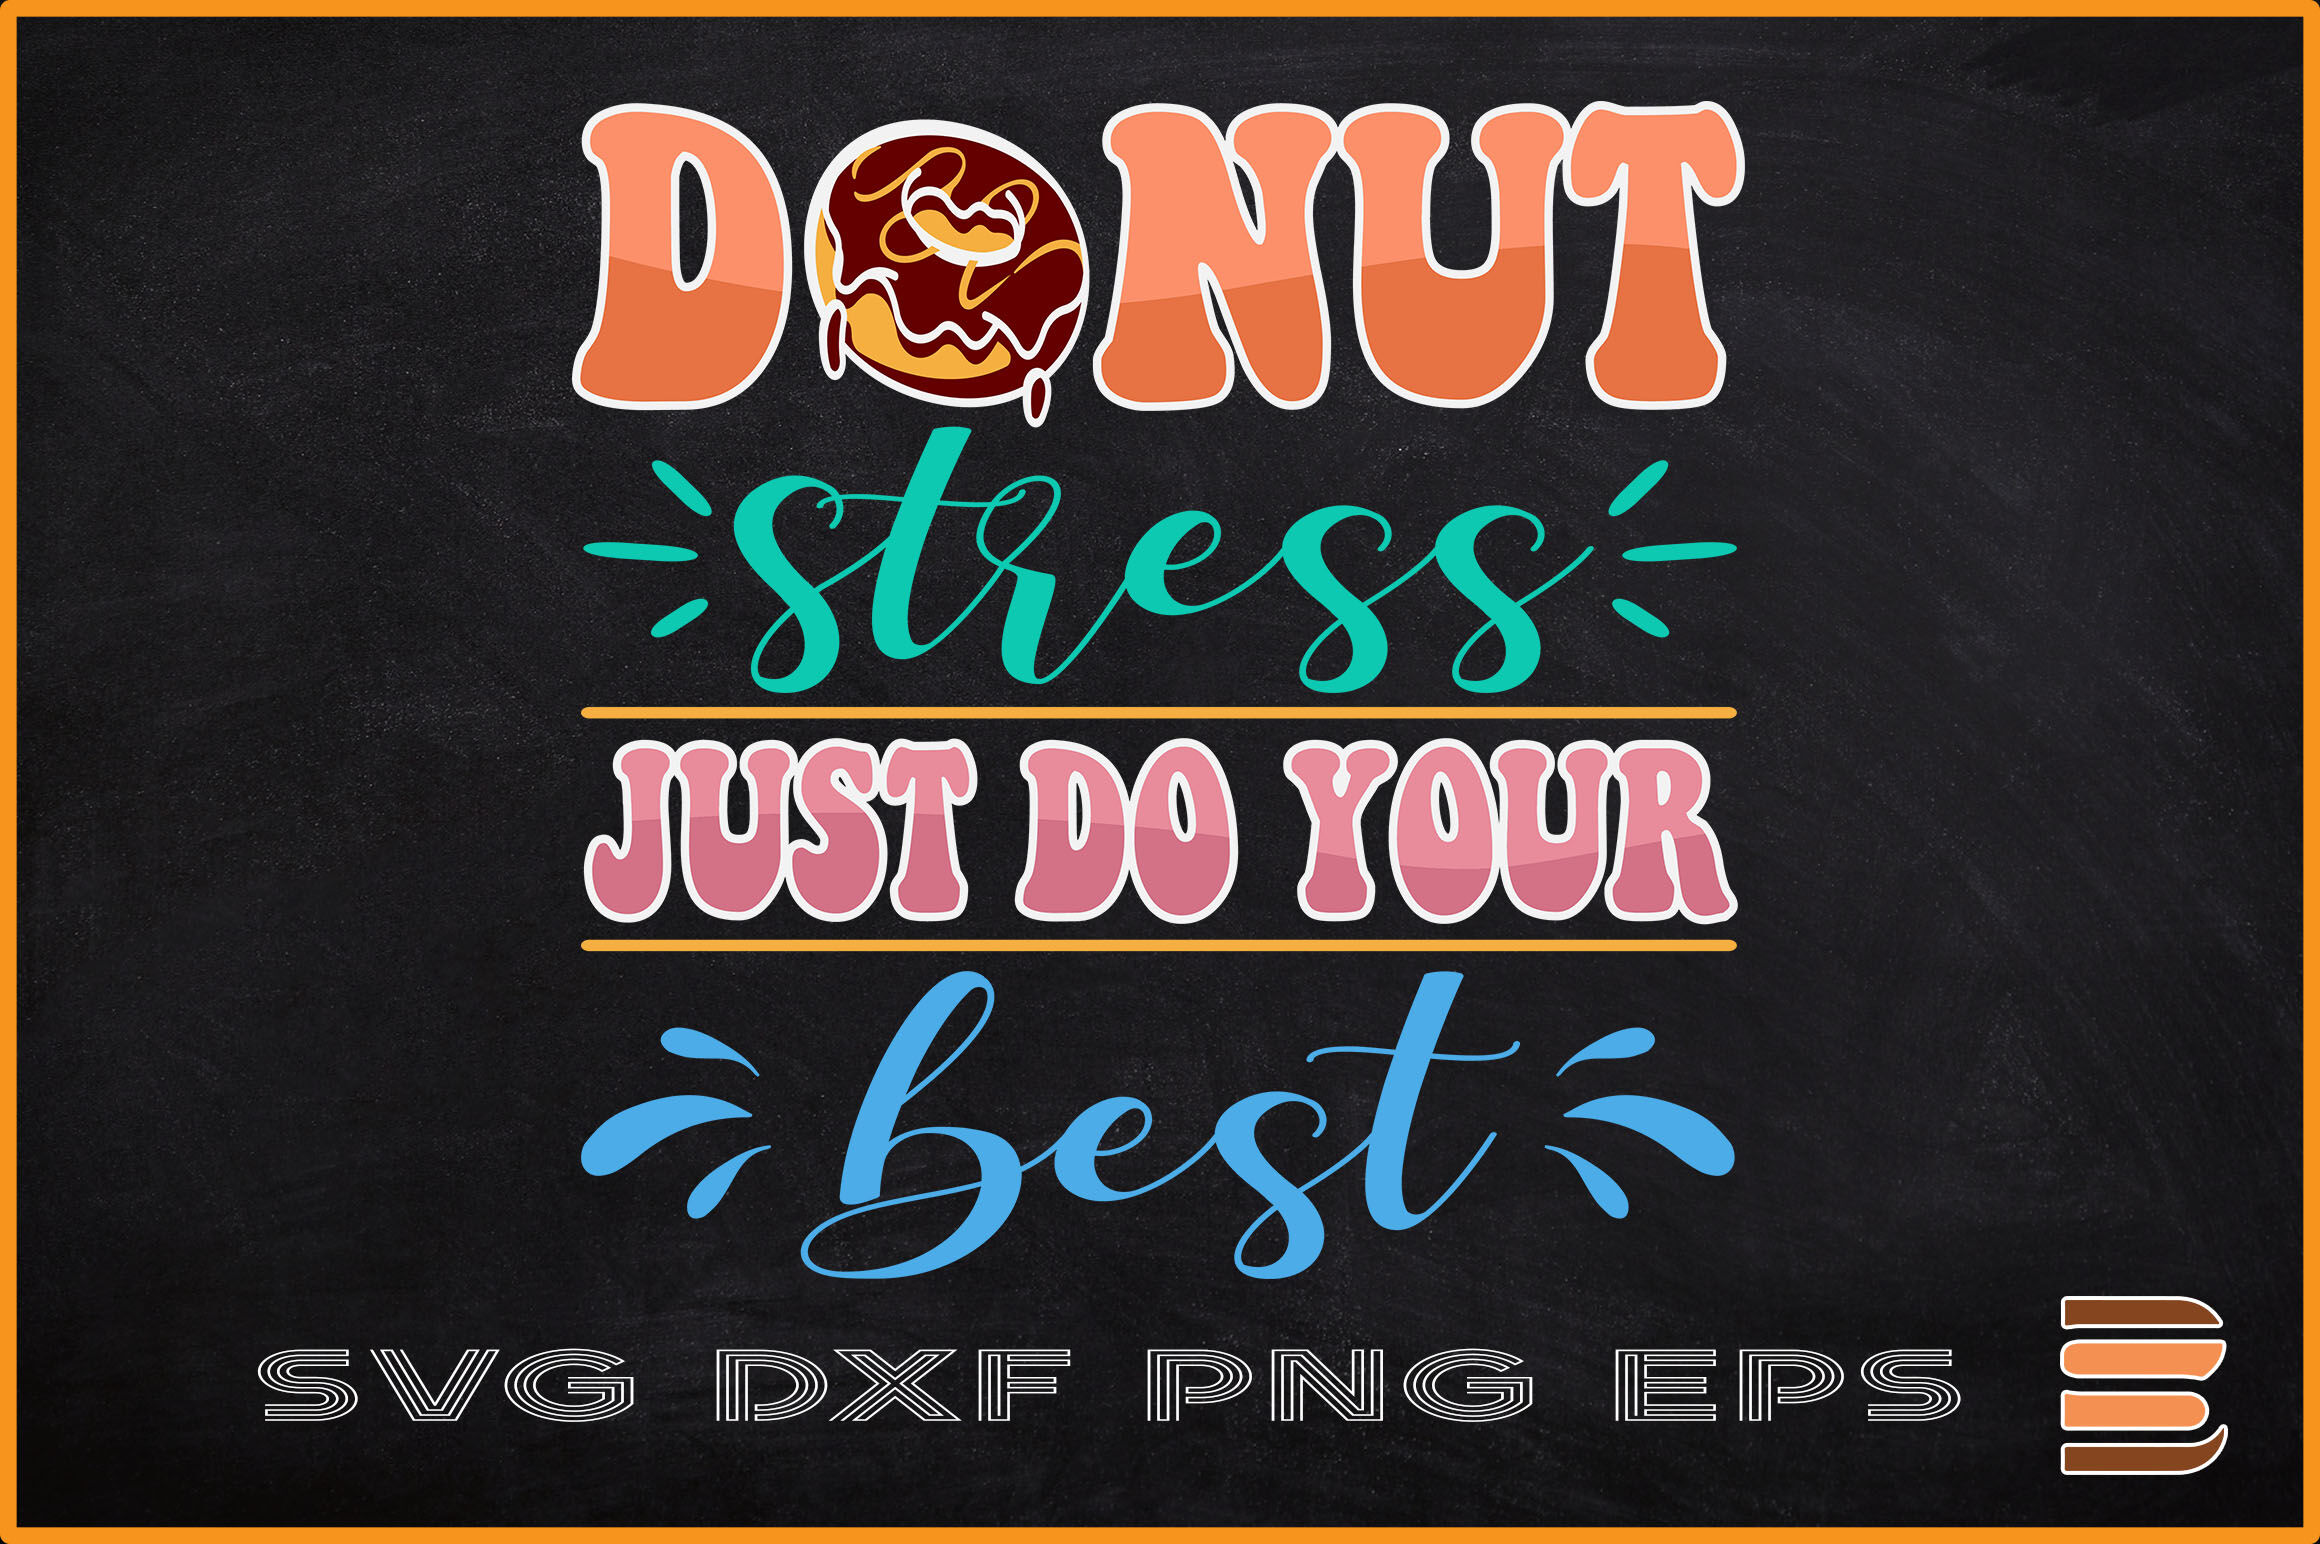 donut-stress-just-do-your-best-graphic-by-thesmallhouseshop